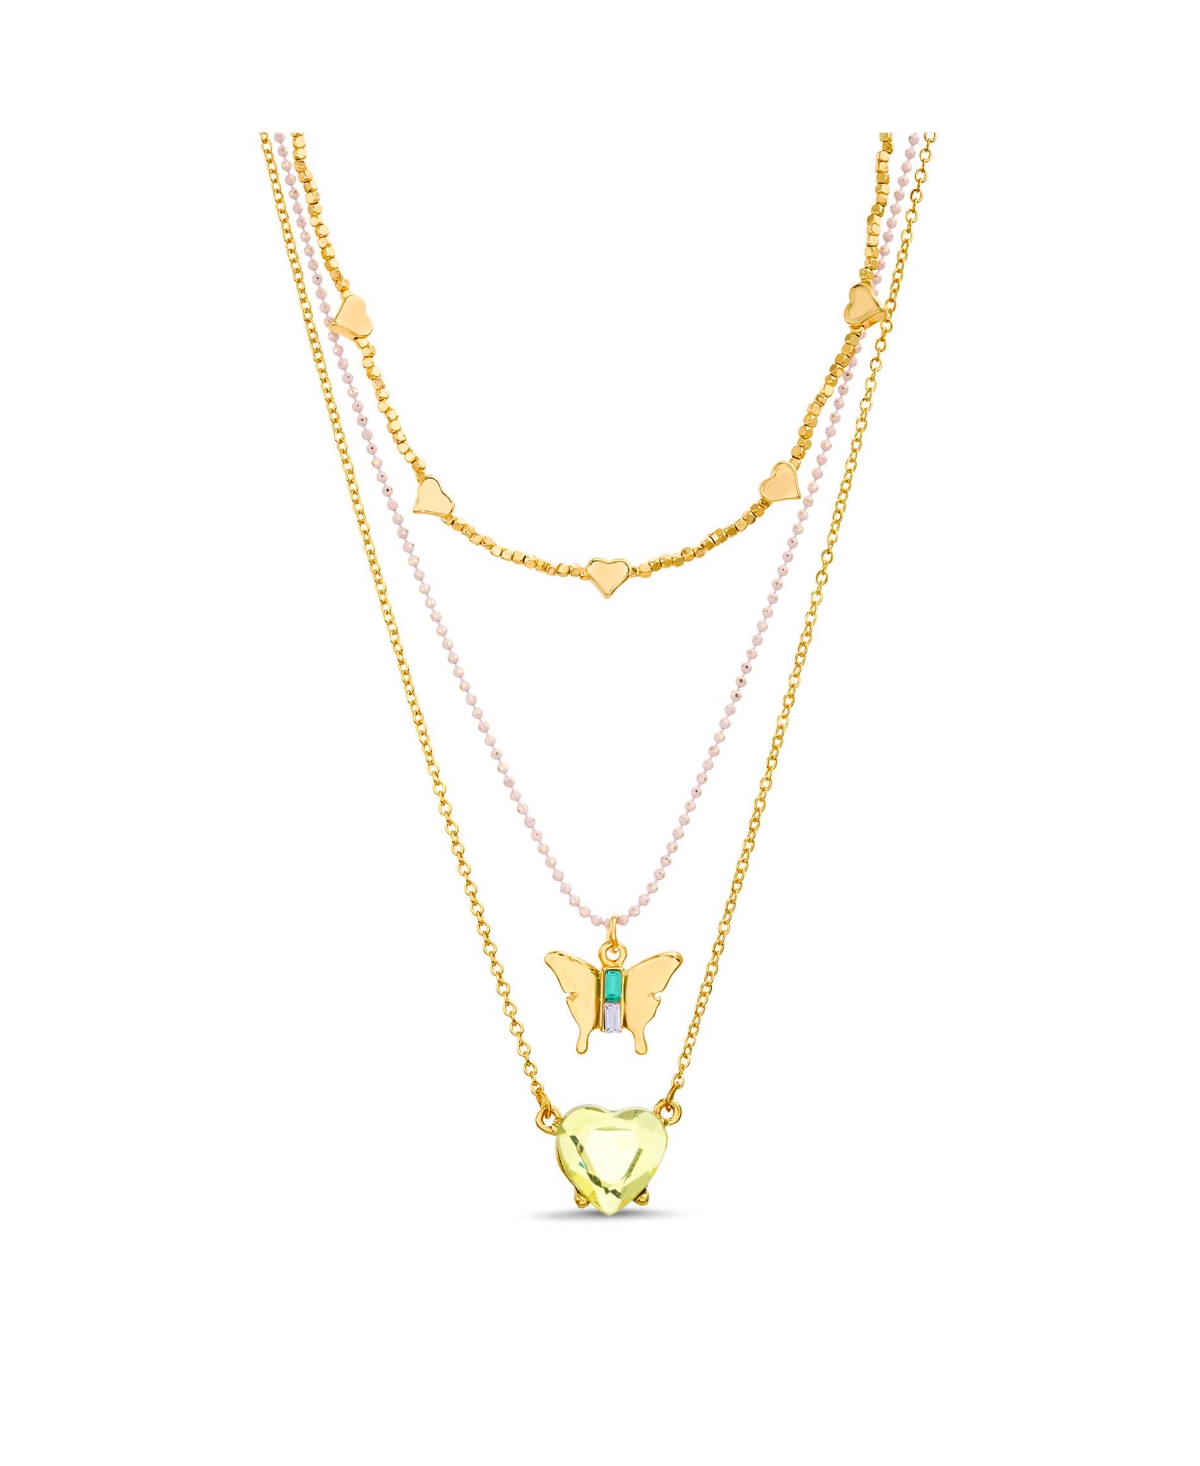 Gold-Tone 3 Piece Layered Necklace Set with Heart and Butterfly Charm Pendants - Gold